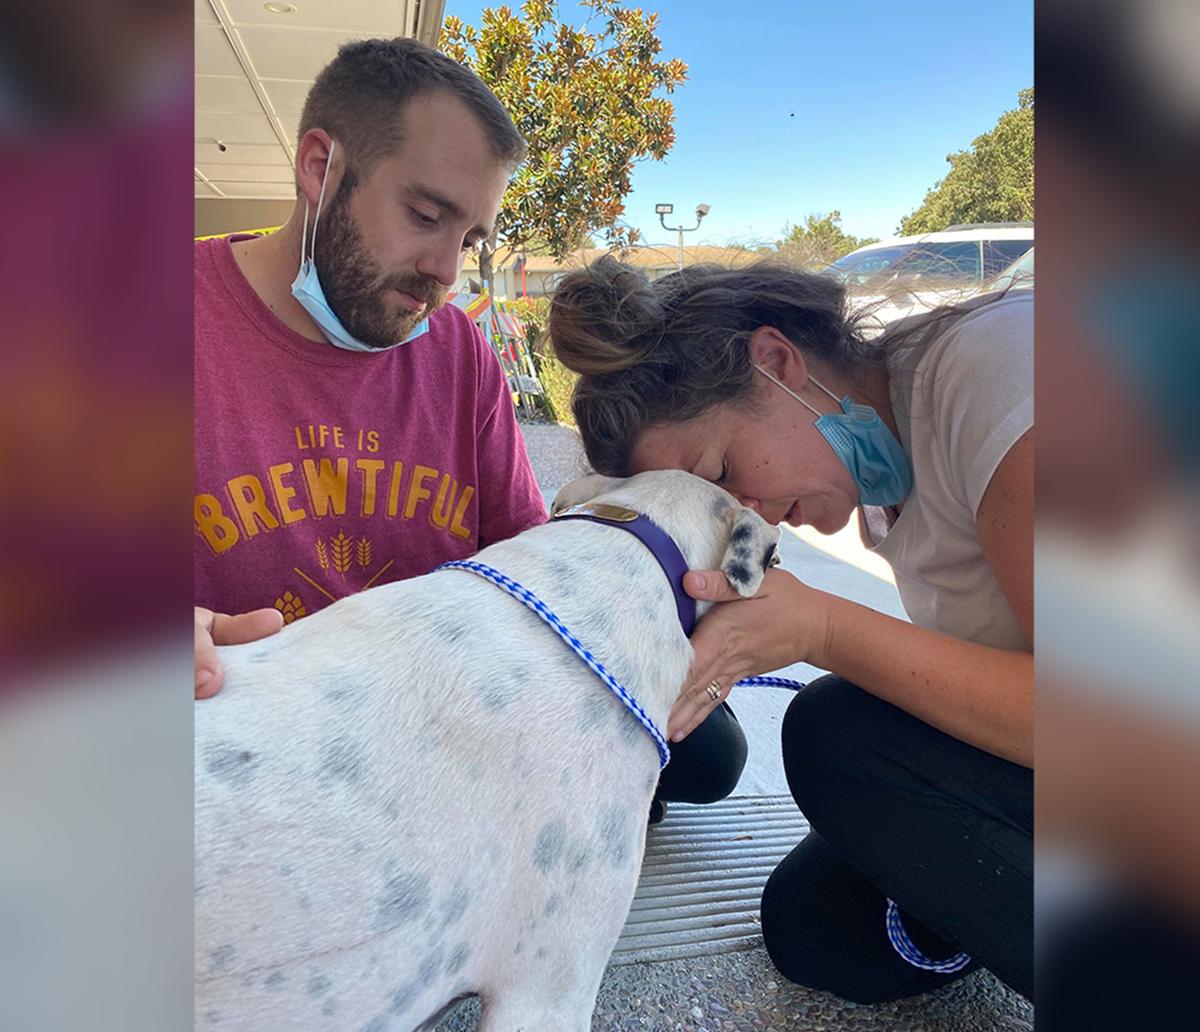 Stefanie and Duane Lindsay after reuniting with their dog, Roo, who went missing after a car accident. (Courtesy of Taryn Grows)